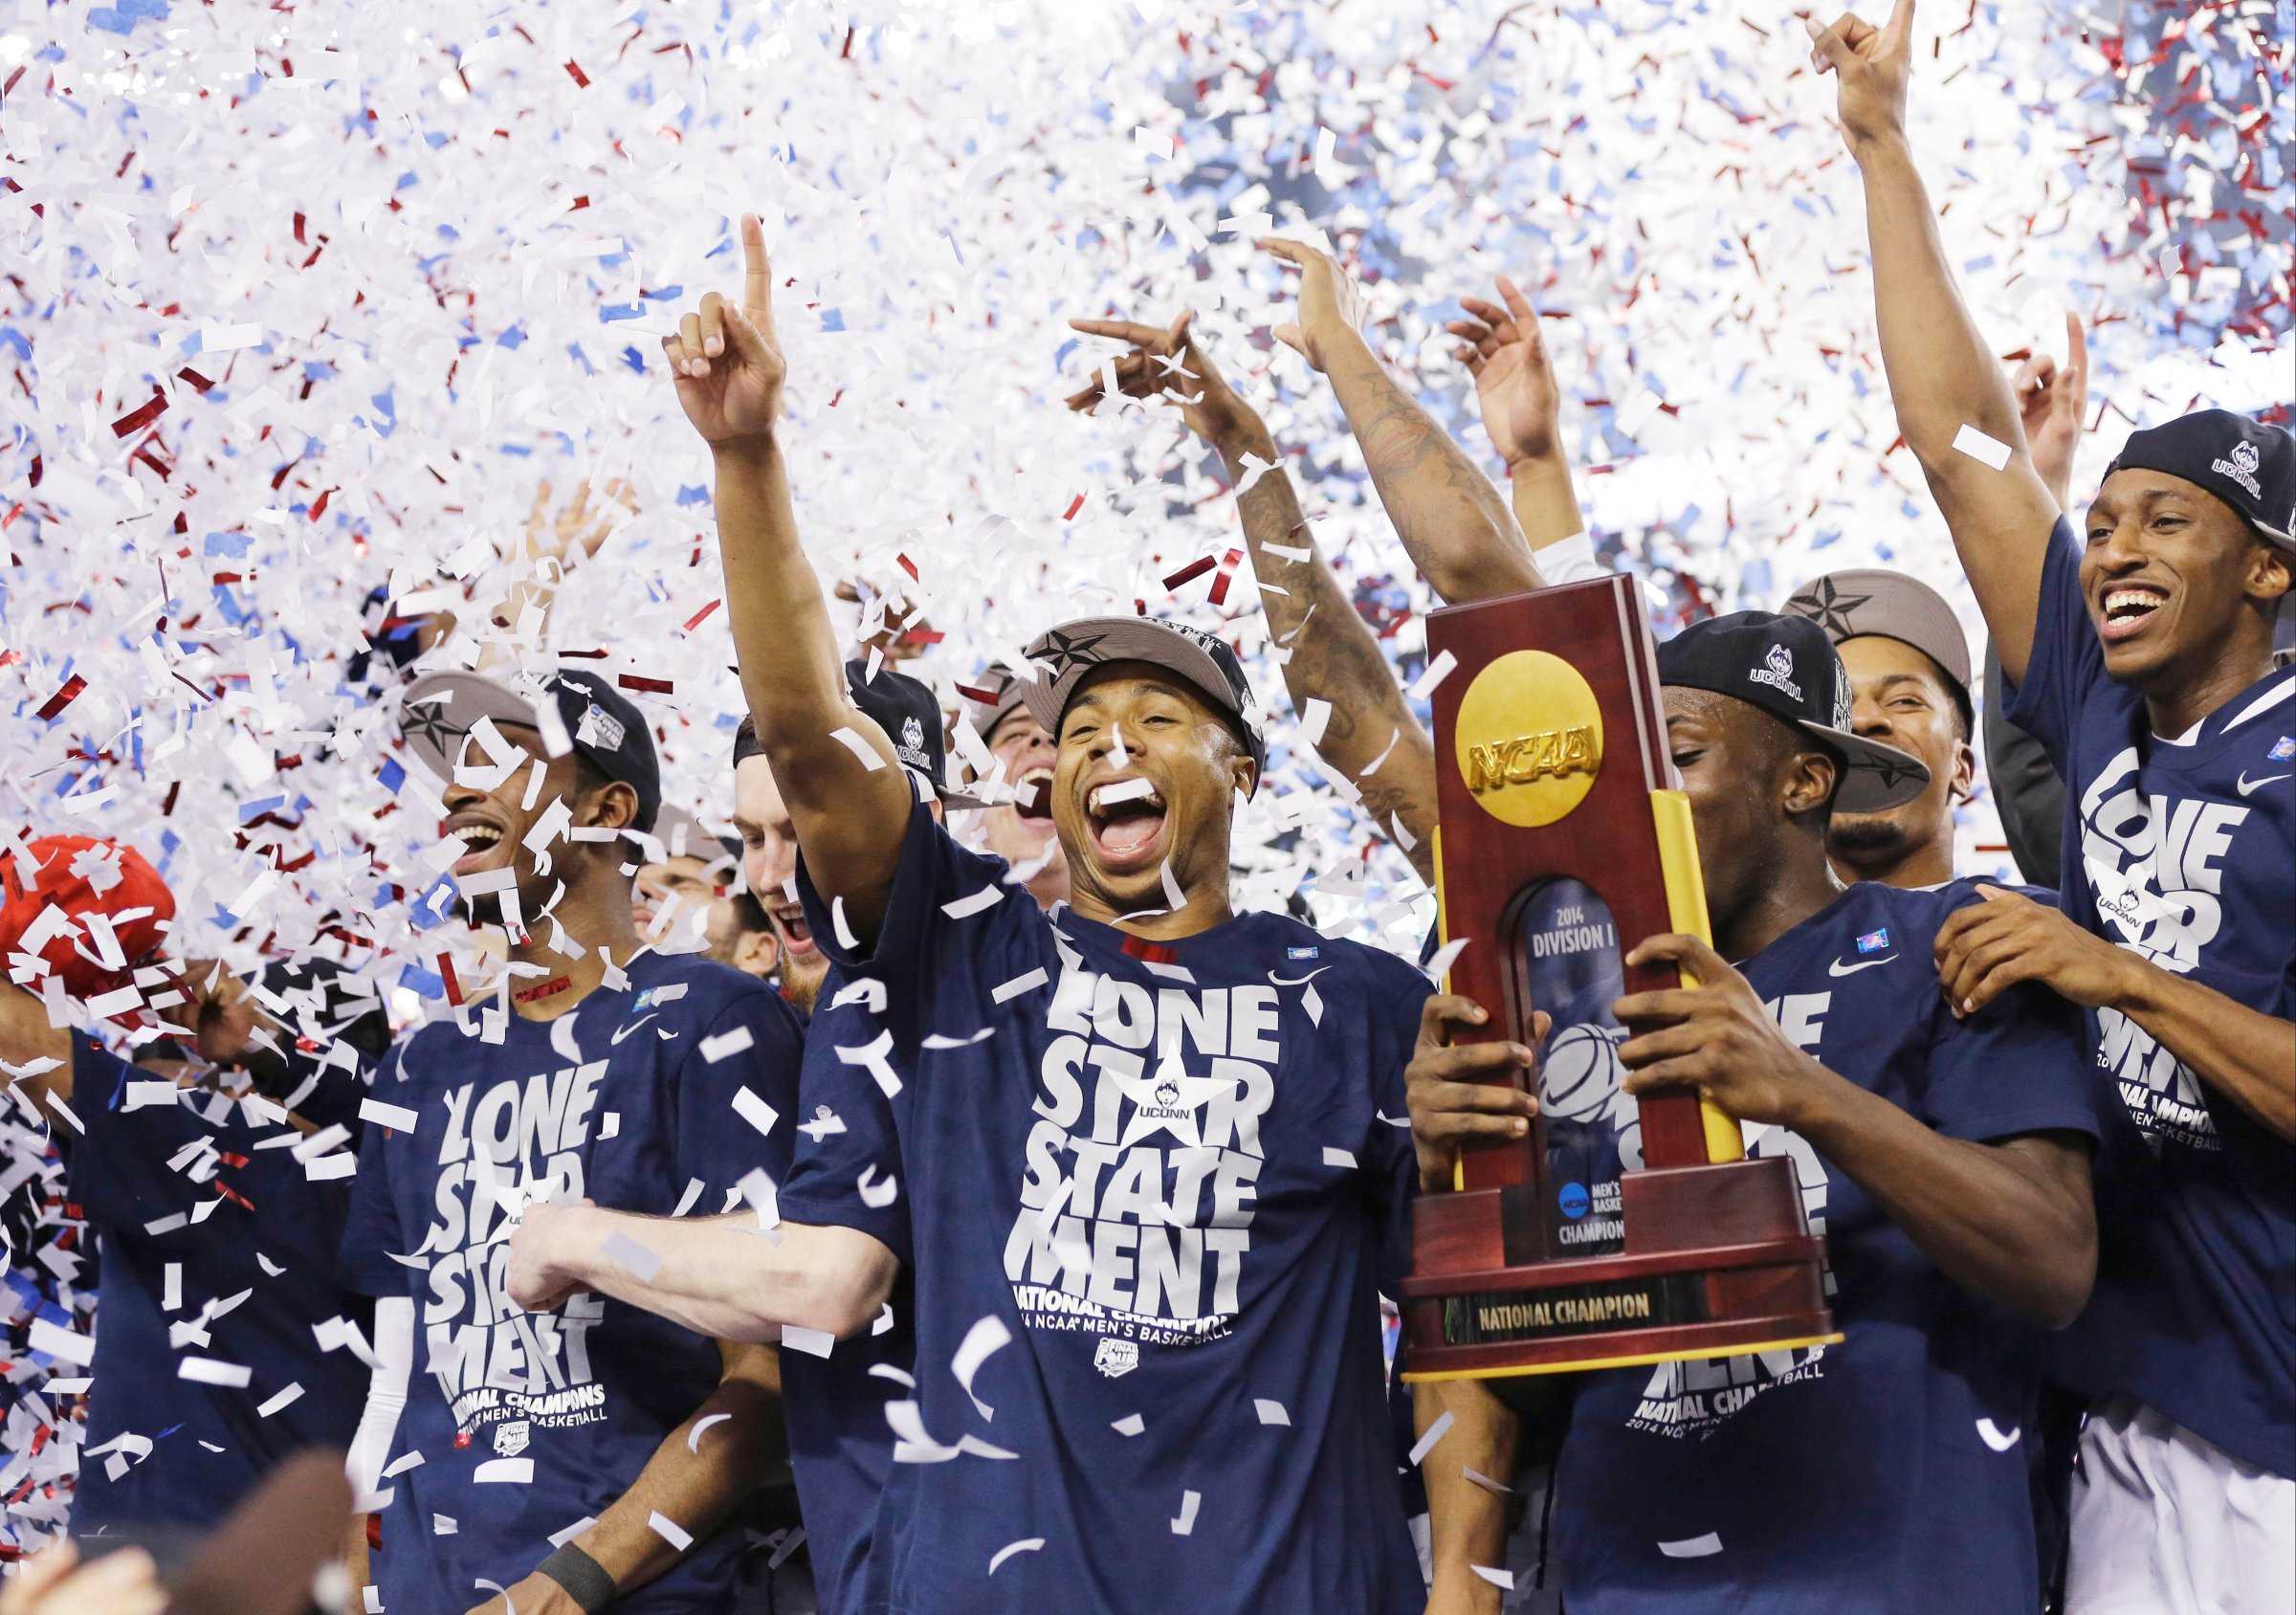 Connecticut celebrates with the championship trophy after beating Kentucky 60-54 at the NCAA Final Four tournament college basketball championship game on April 7, 2014, in Arlington, Texas.